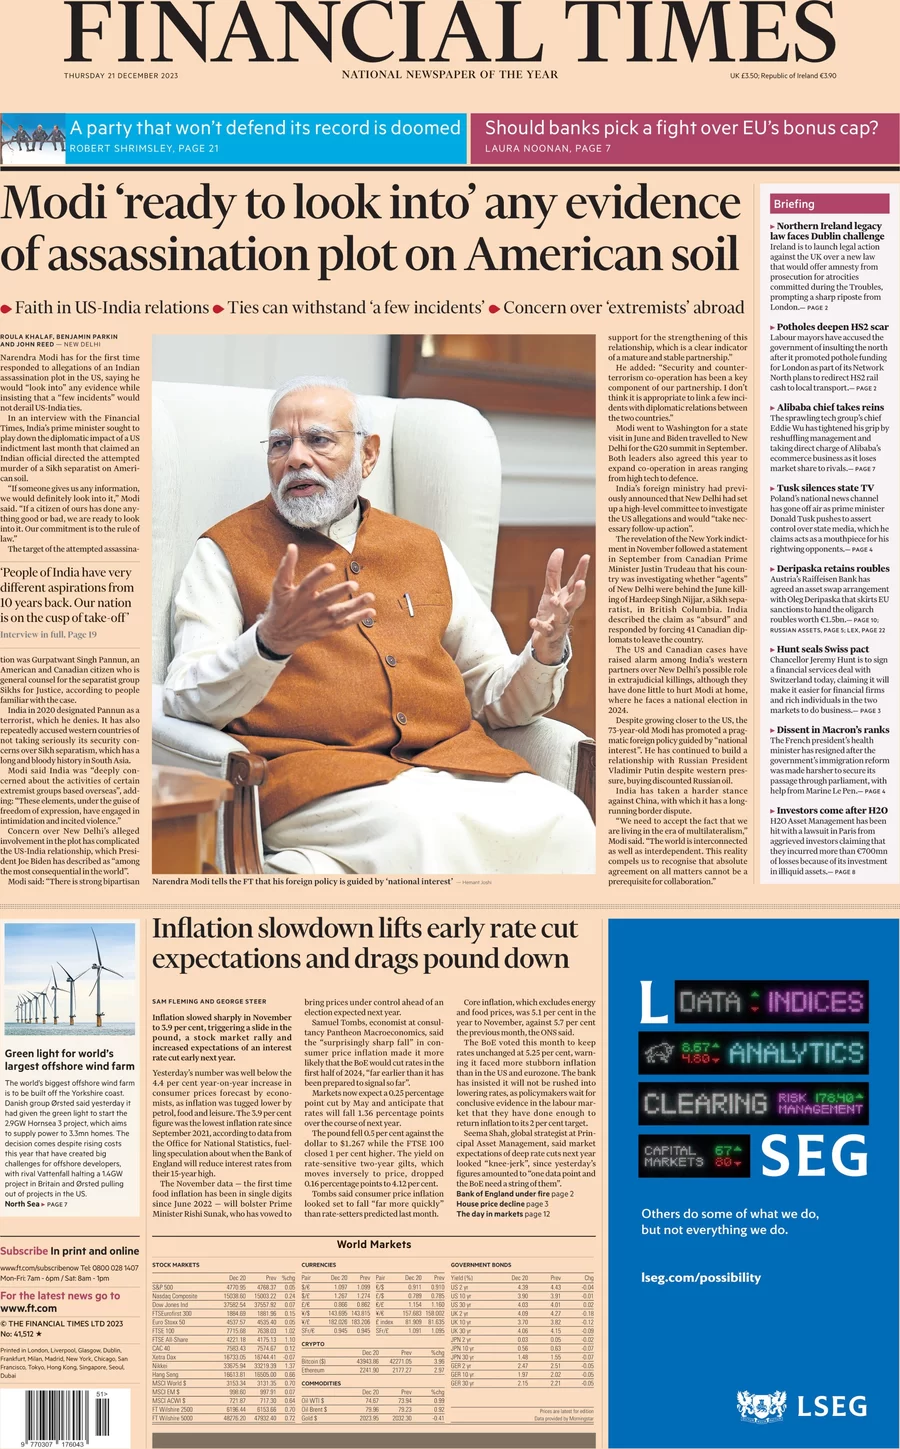 Financial Times - Modi ready to look into any evidence of assassination plot on American soil